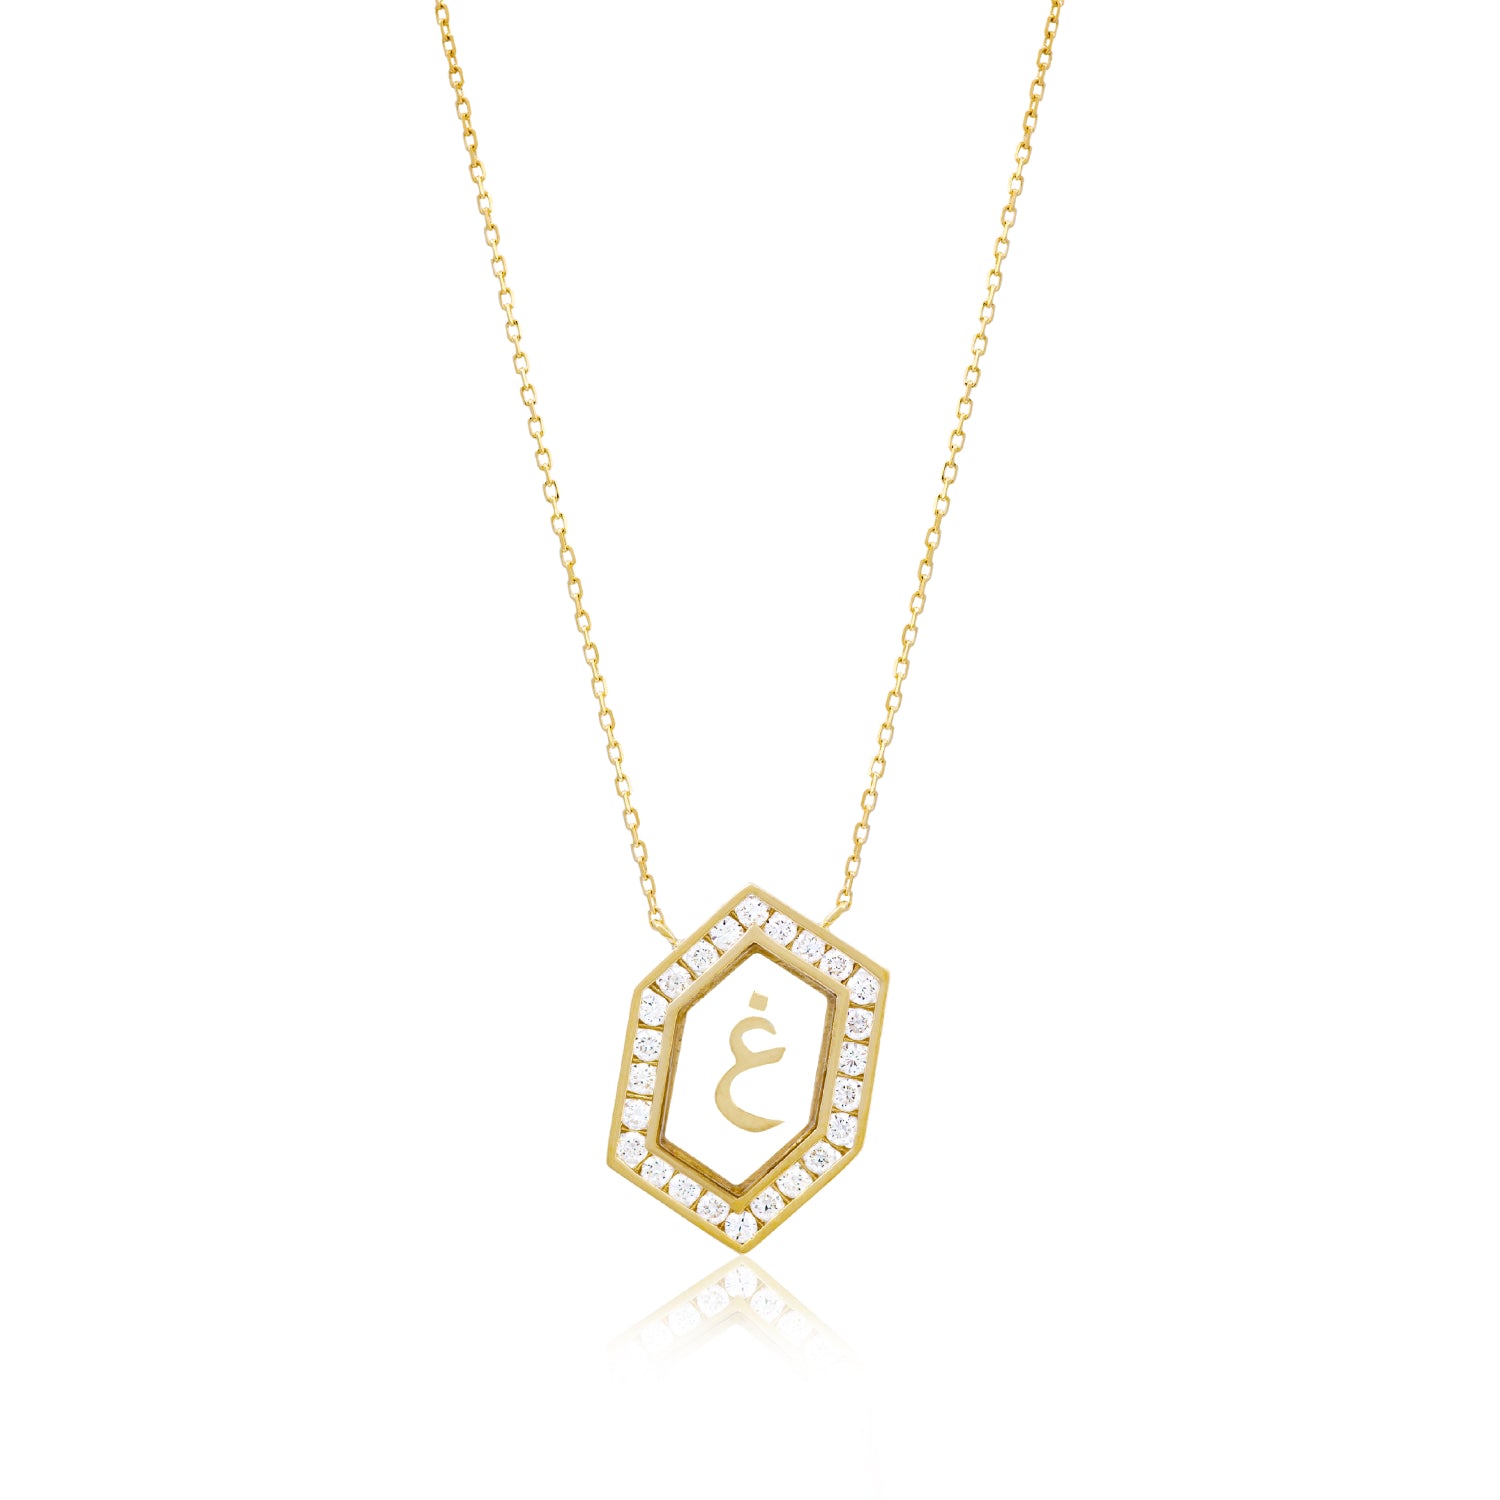 Qamoos 1.0 Letter غ Diamond Necklace in Yellow Gold